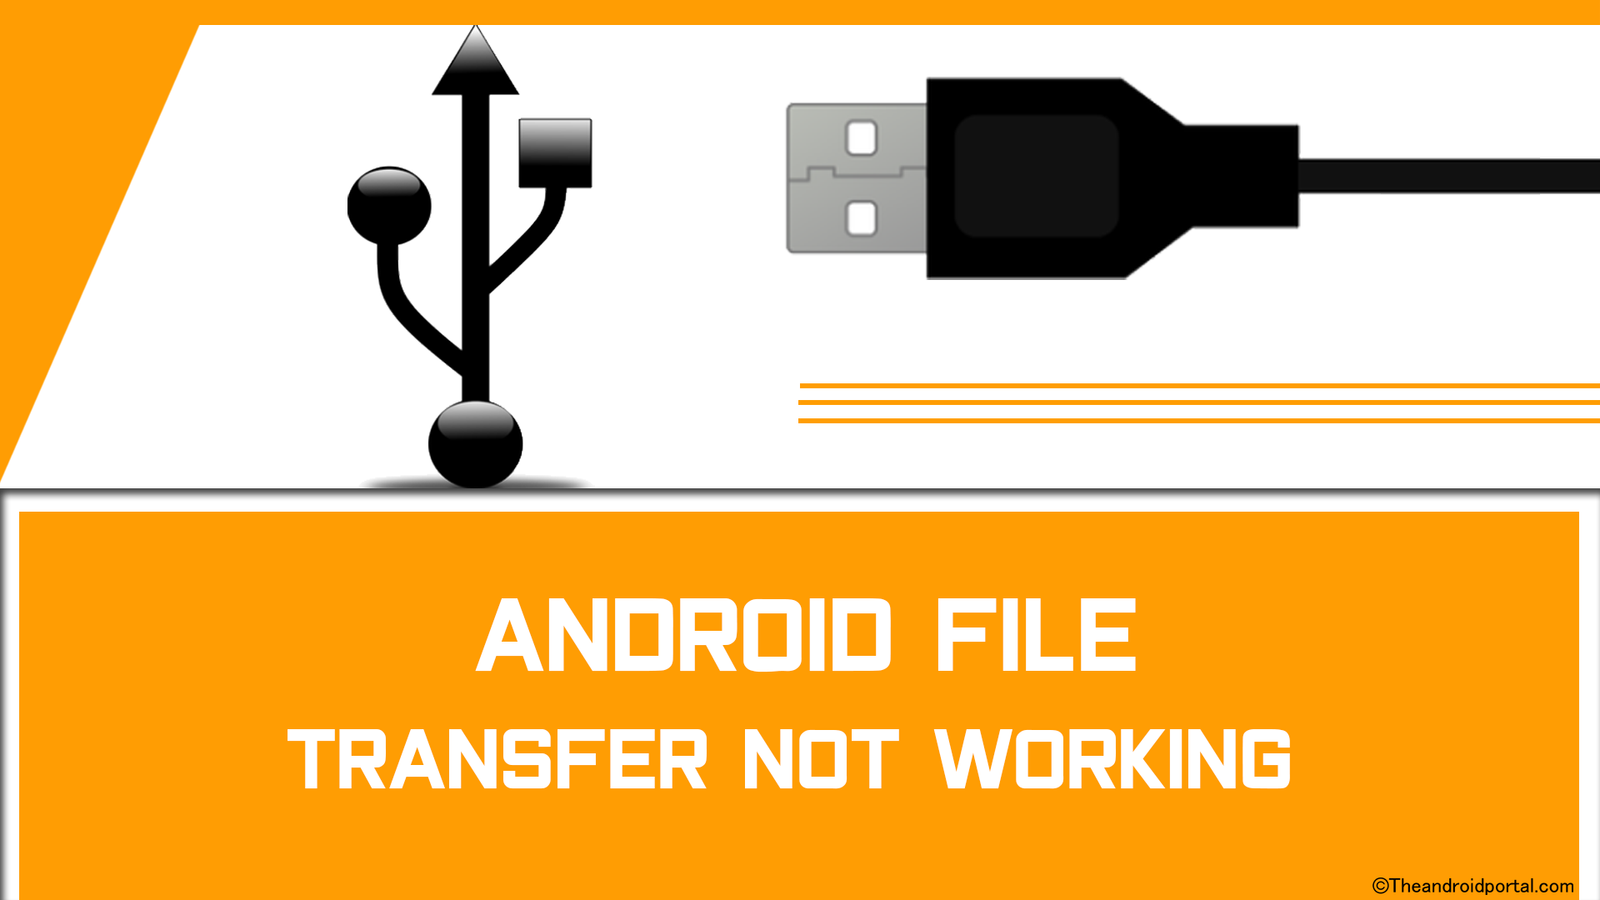 Android File Transfer Not Working - theandroidportal.com